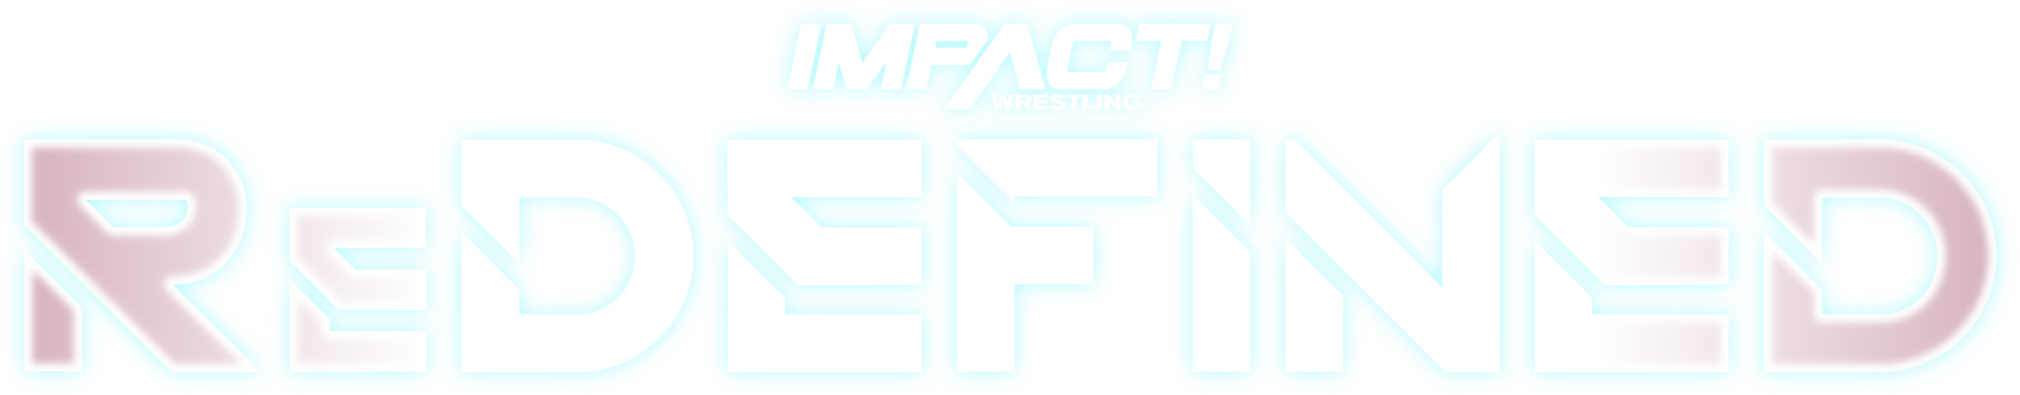 impact_wrestling_redefined_logo_by_hellm